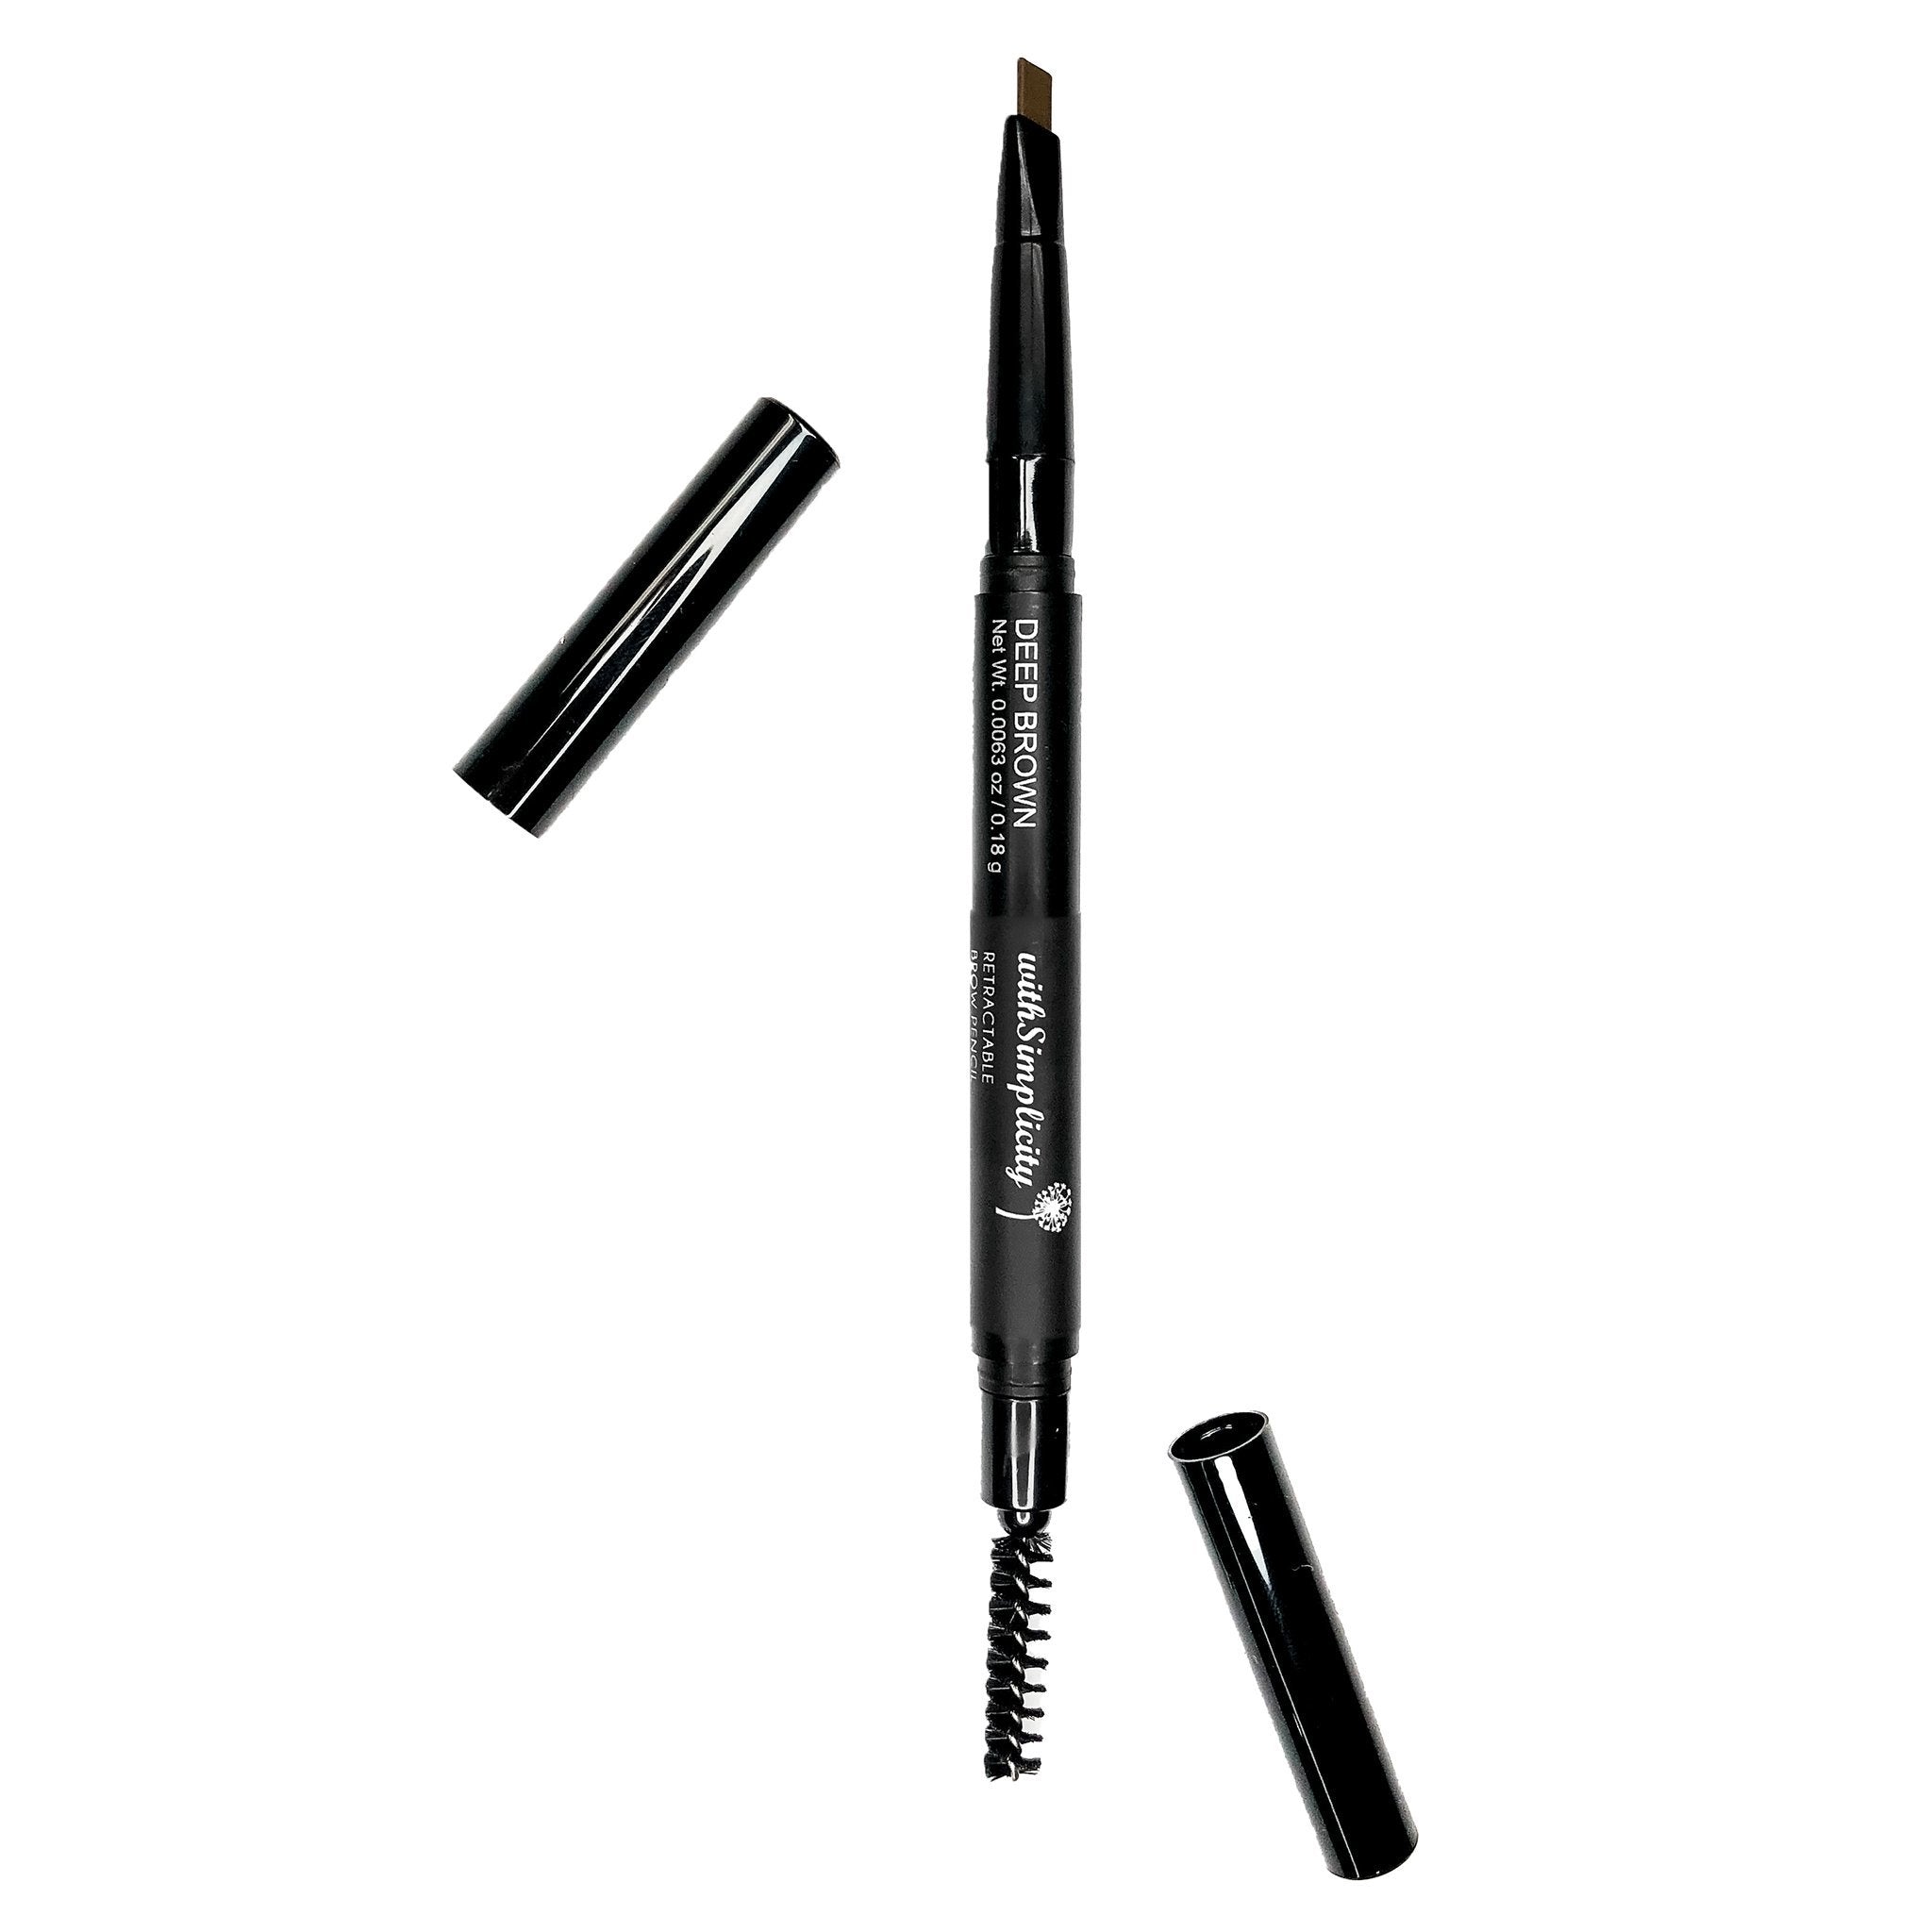 Retractable Brow Pencil-Makeup-withSimplicity-withSimplicity